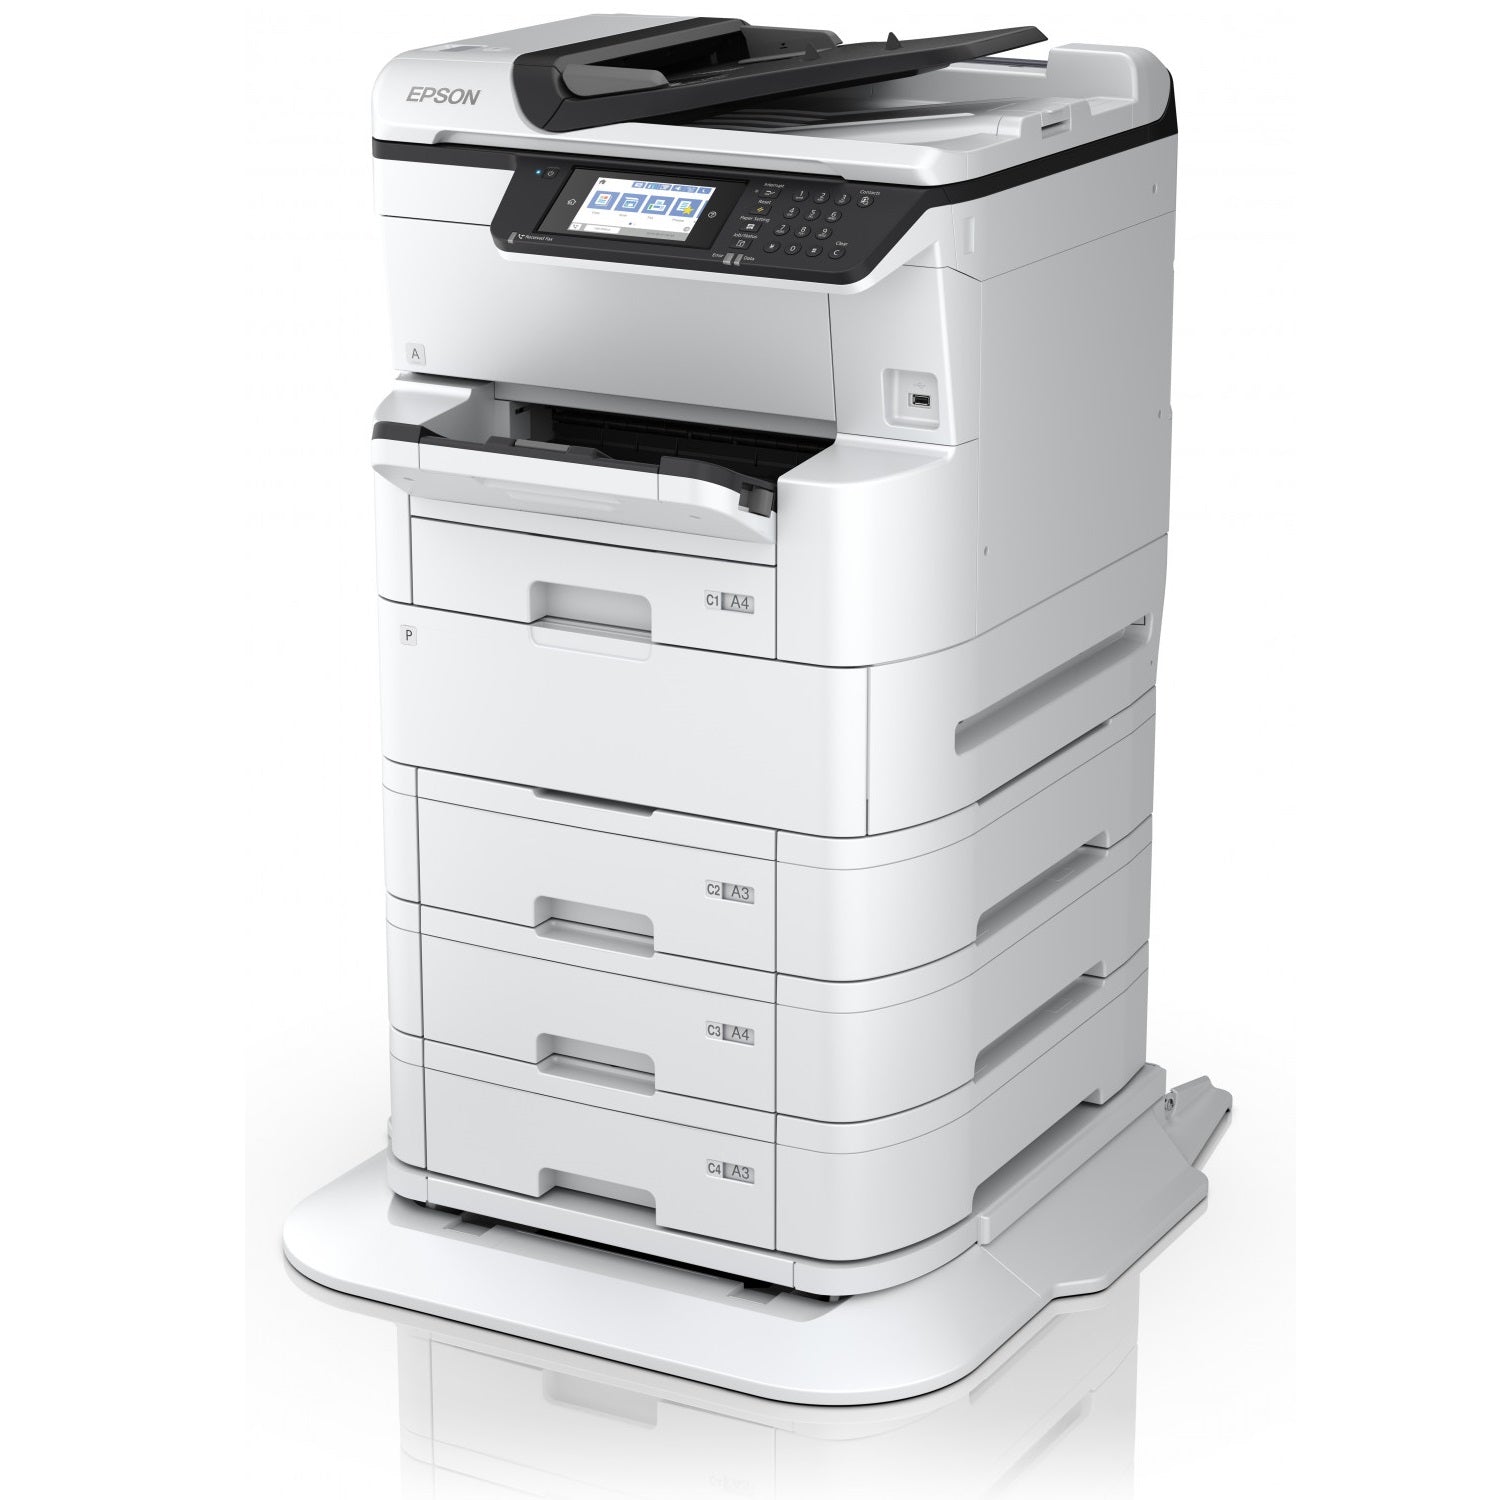 Absolute Toner $55/Month New Epson WorkForce Color Pro WF-C878R All-in-One Printer With Low Cost color printing for busy workgroups Showroom Color Copier